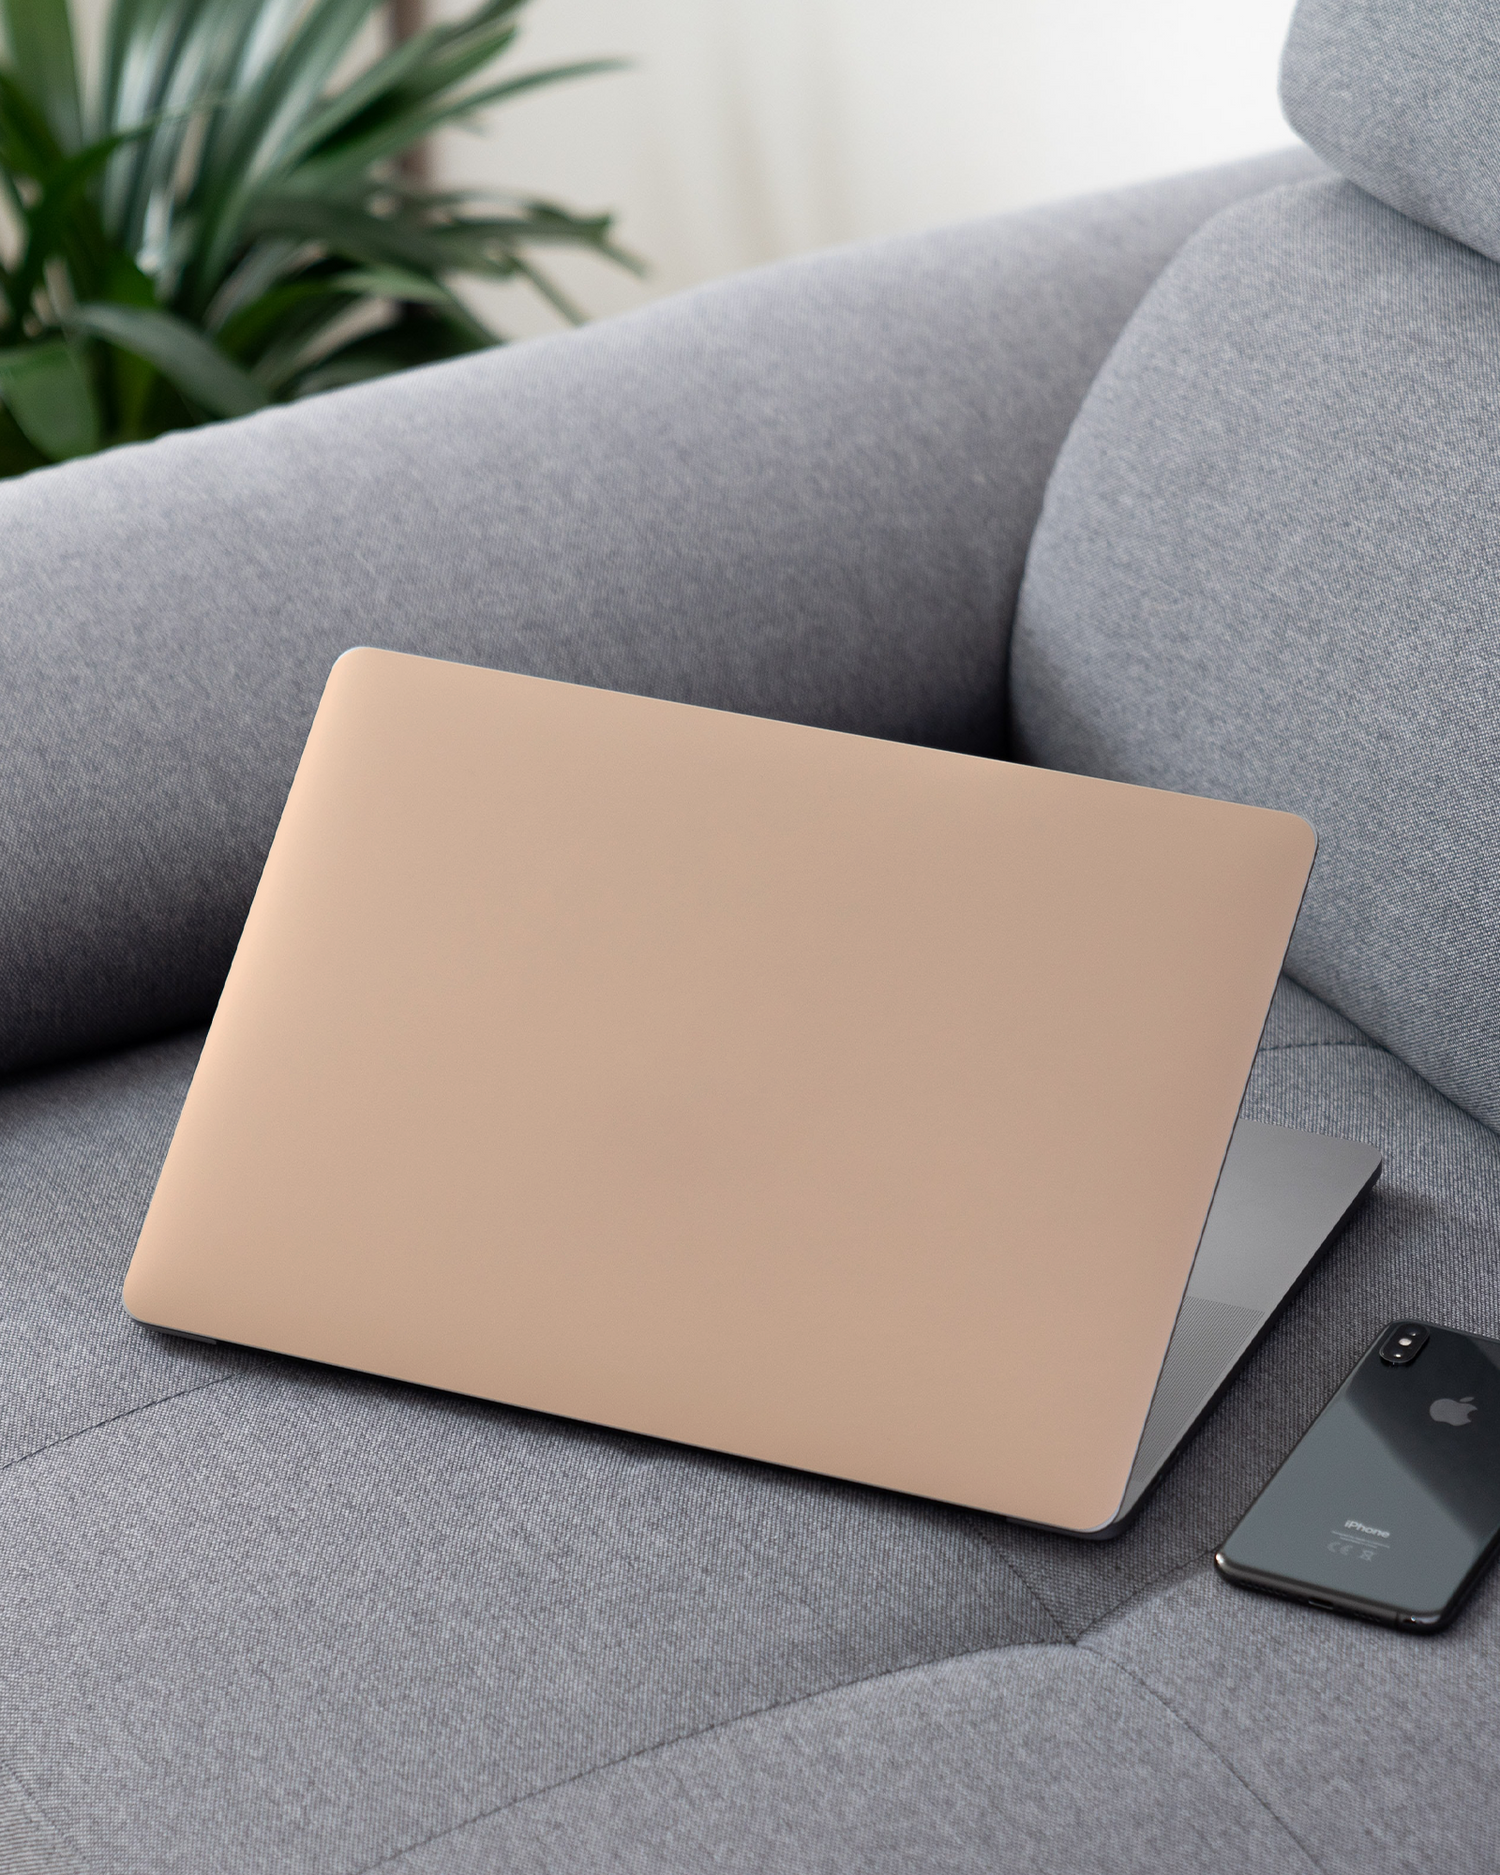 PEACH Laptop Skin for 13 inch Apple MacBooks on a couch